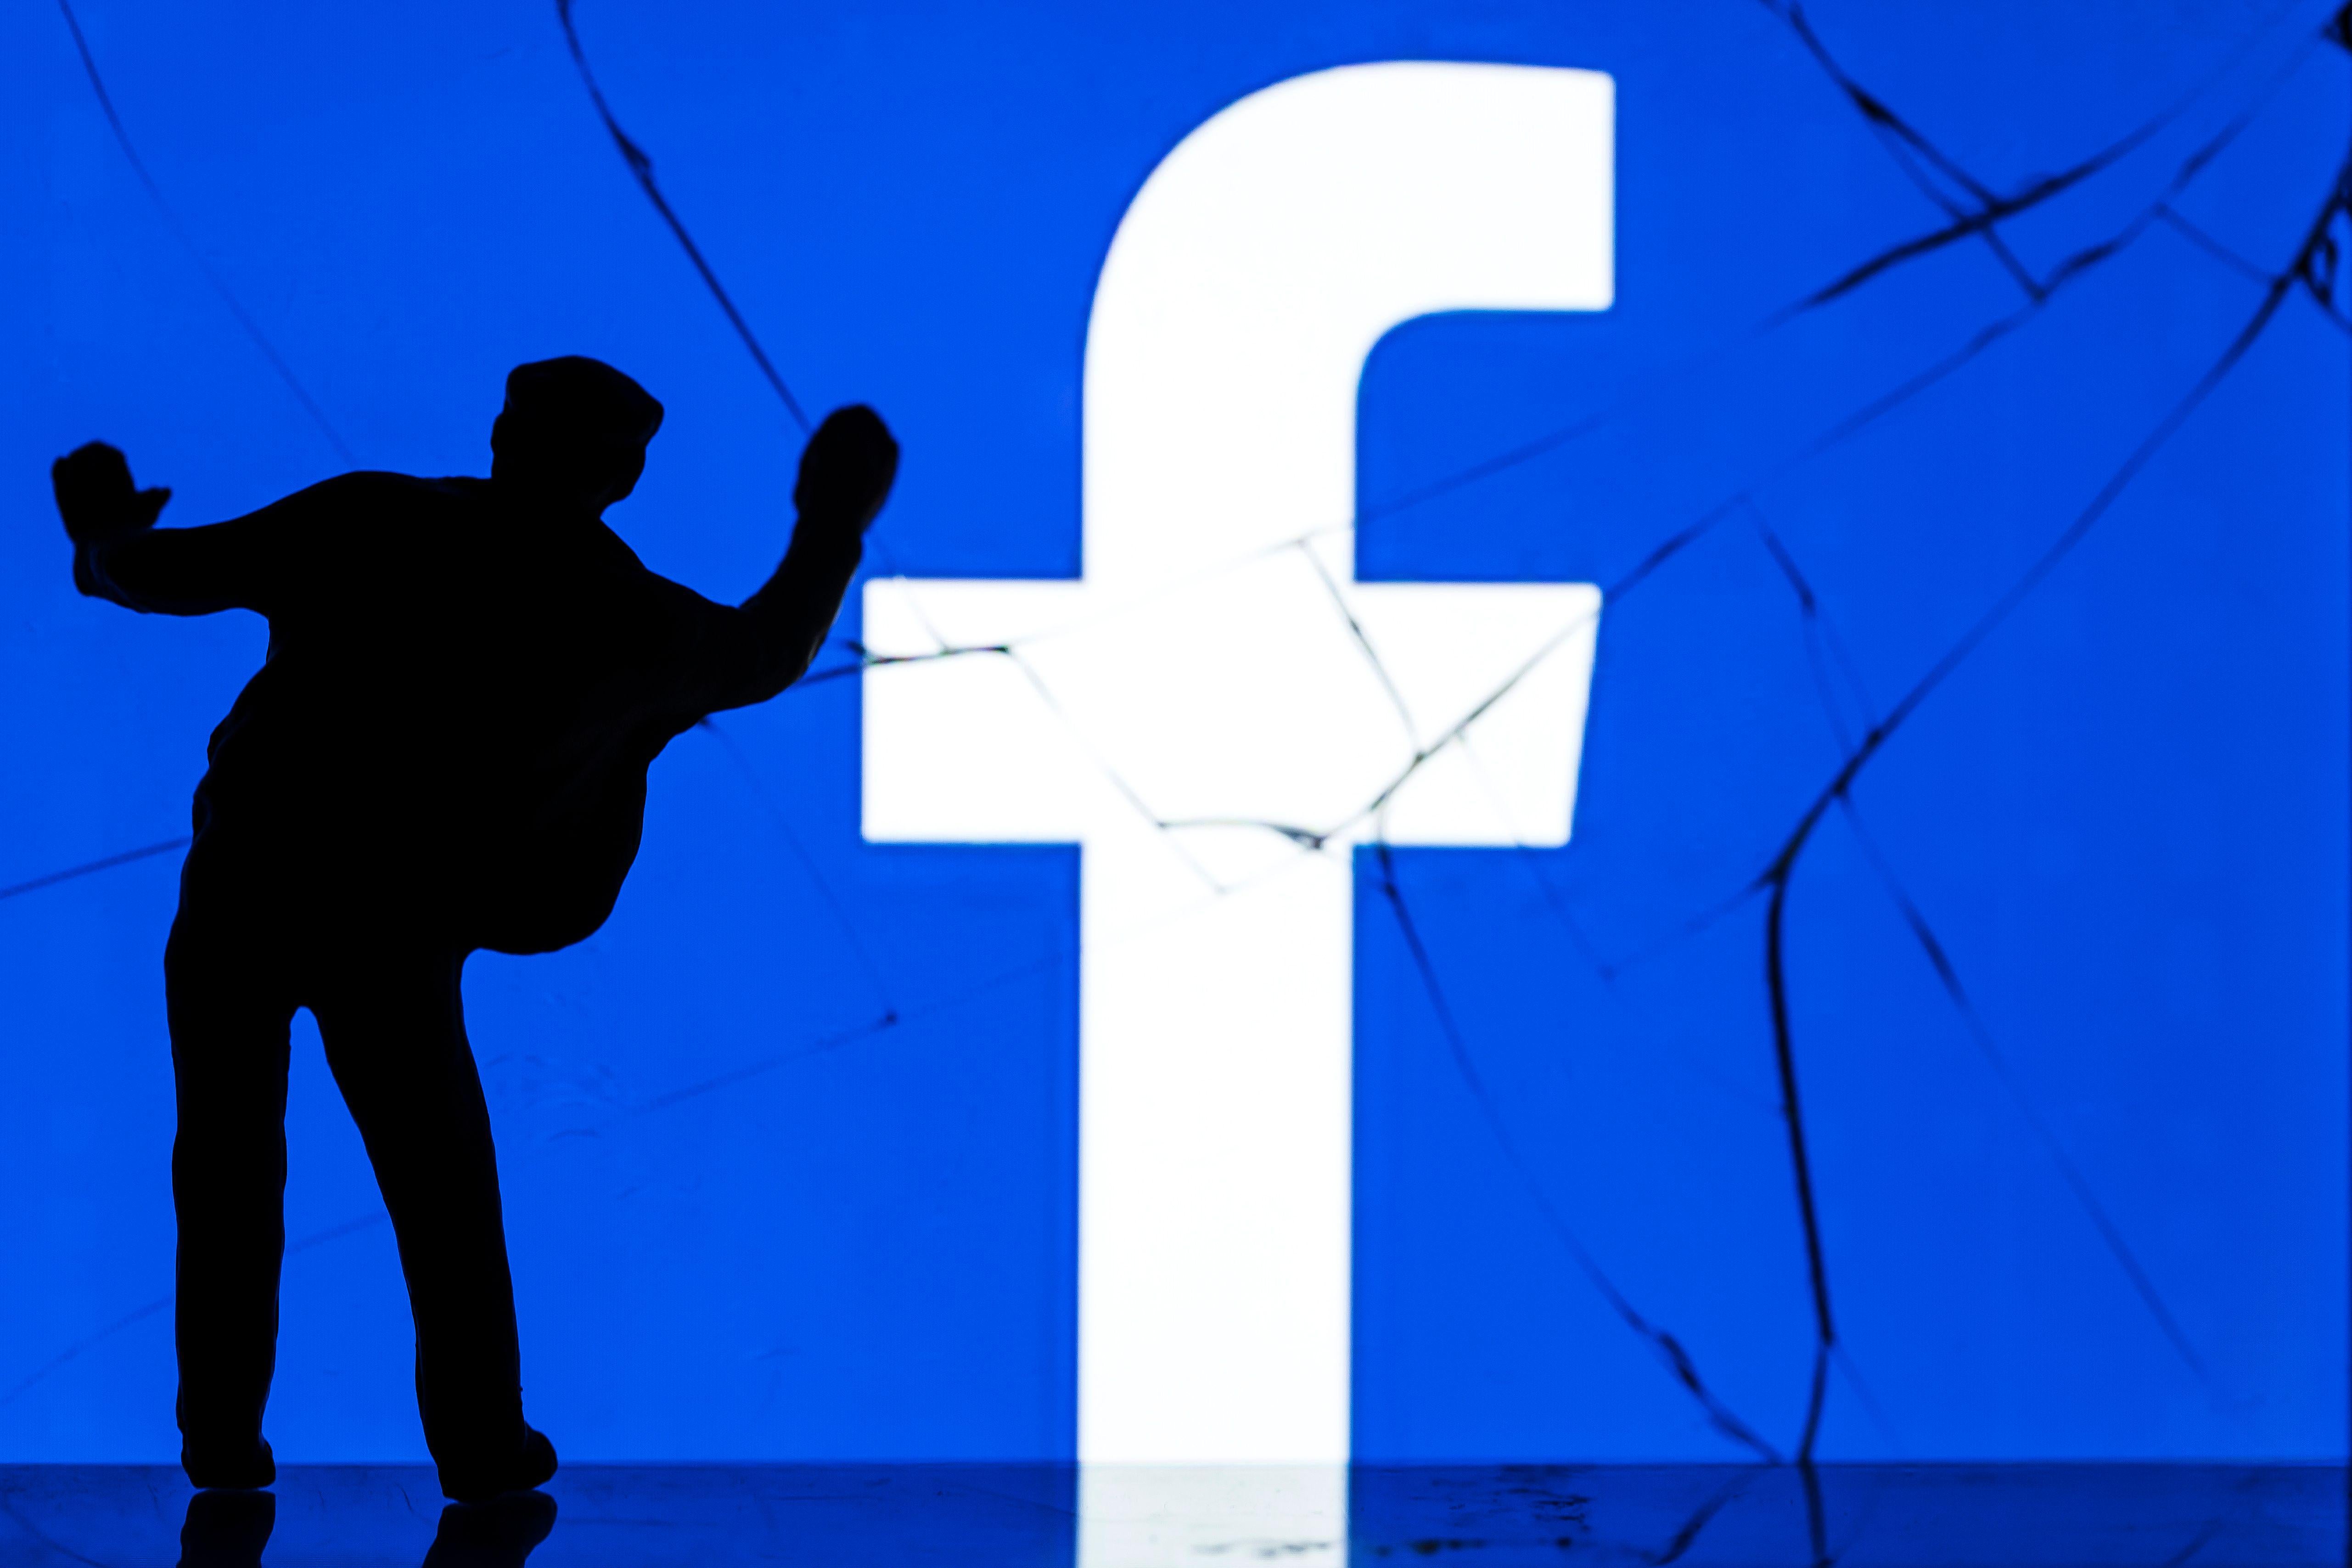 A figurine standing in front of the Facebook logo.